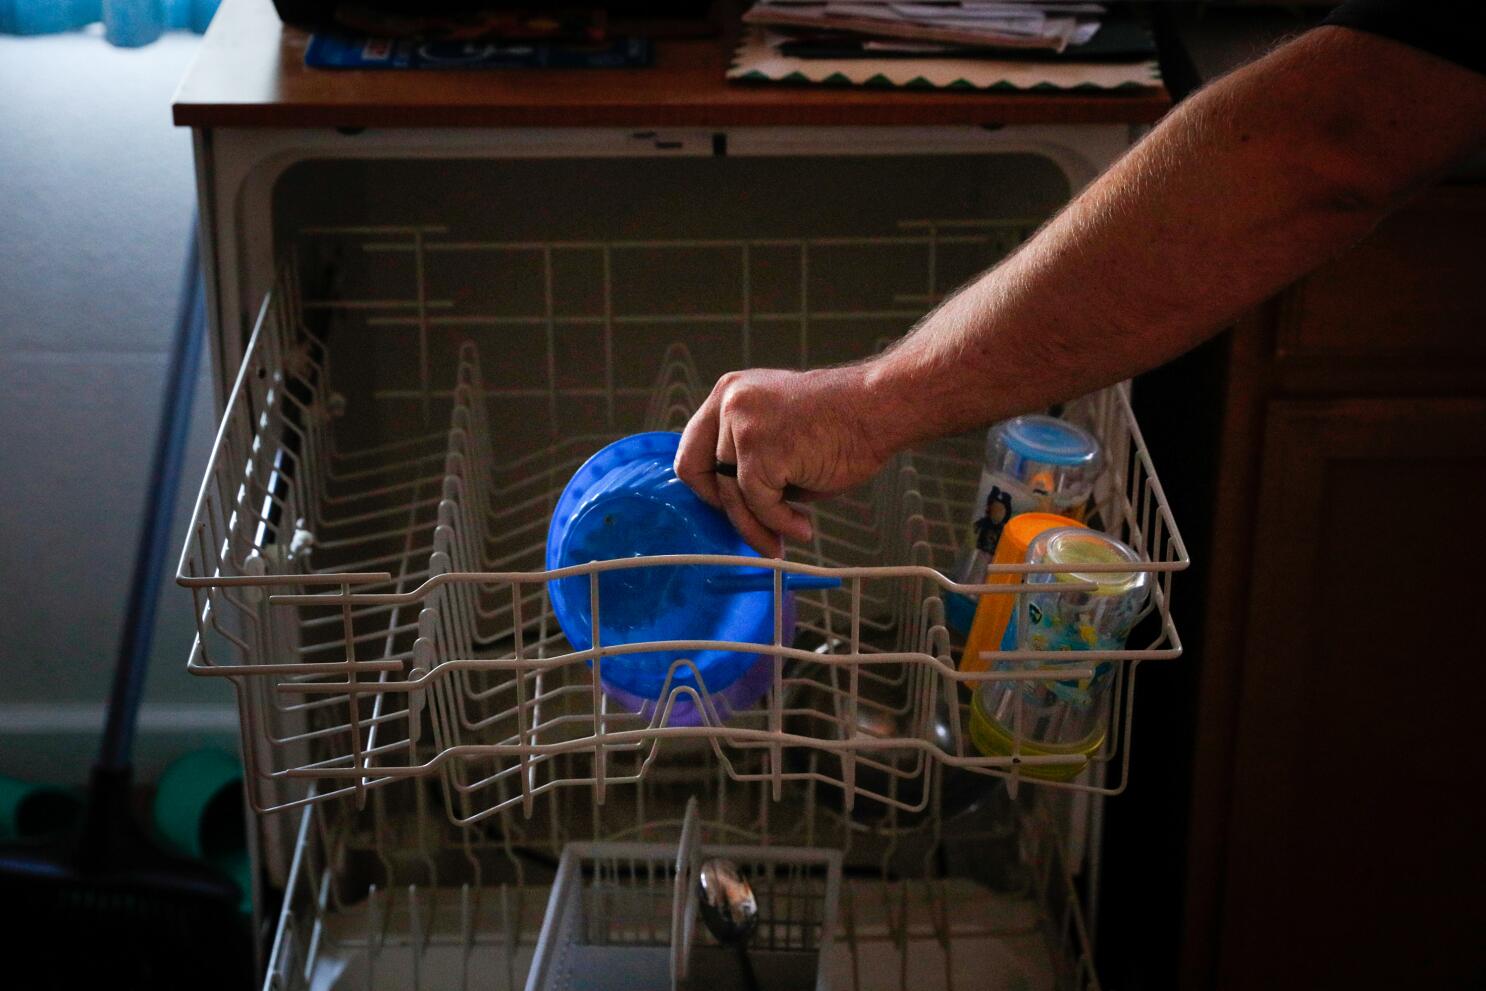 The Worst Things You Can Do to Your Dishwasher, According to Repair Pros